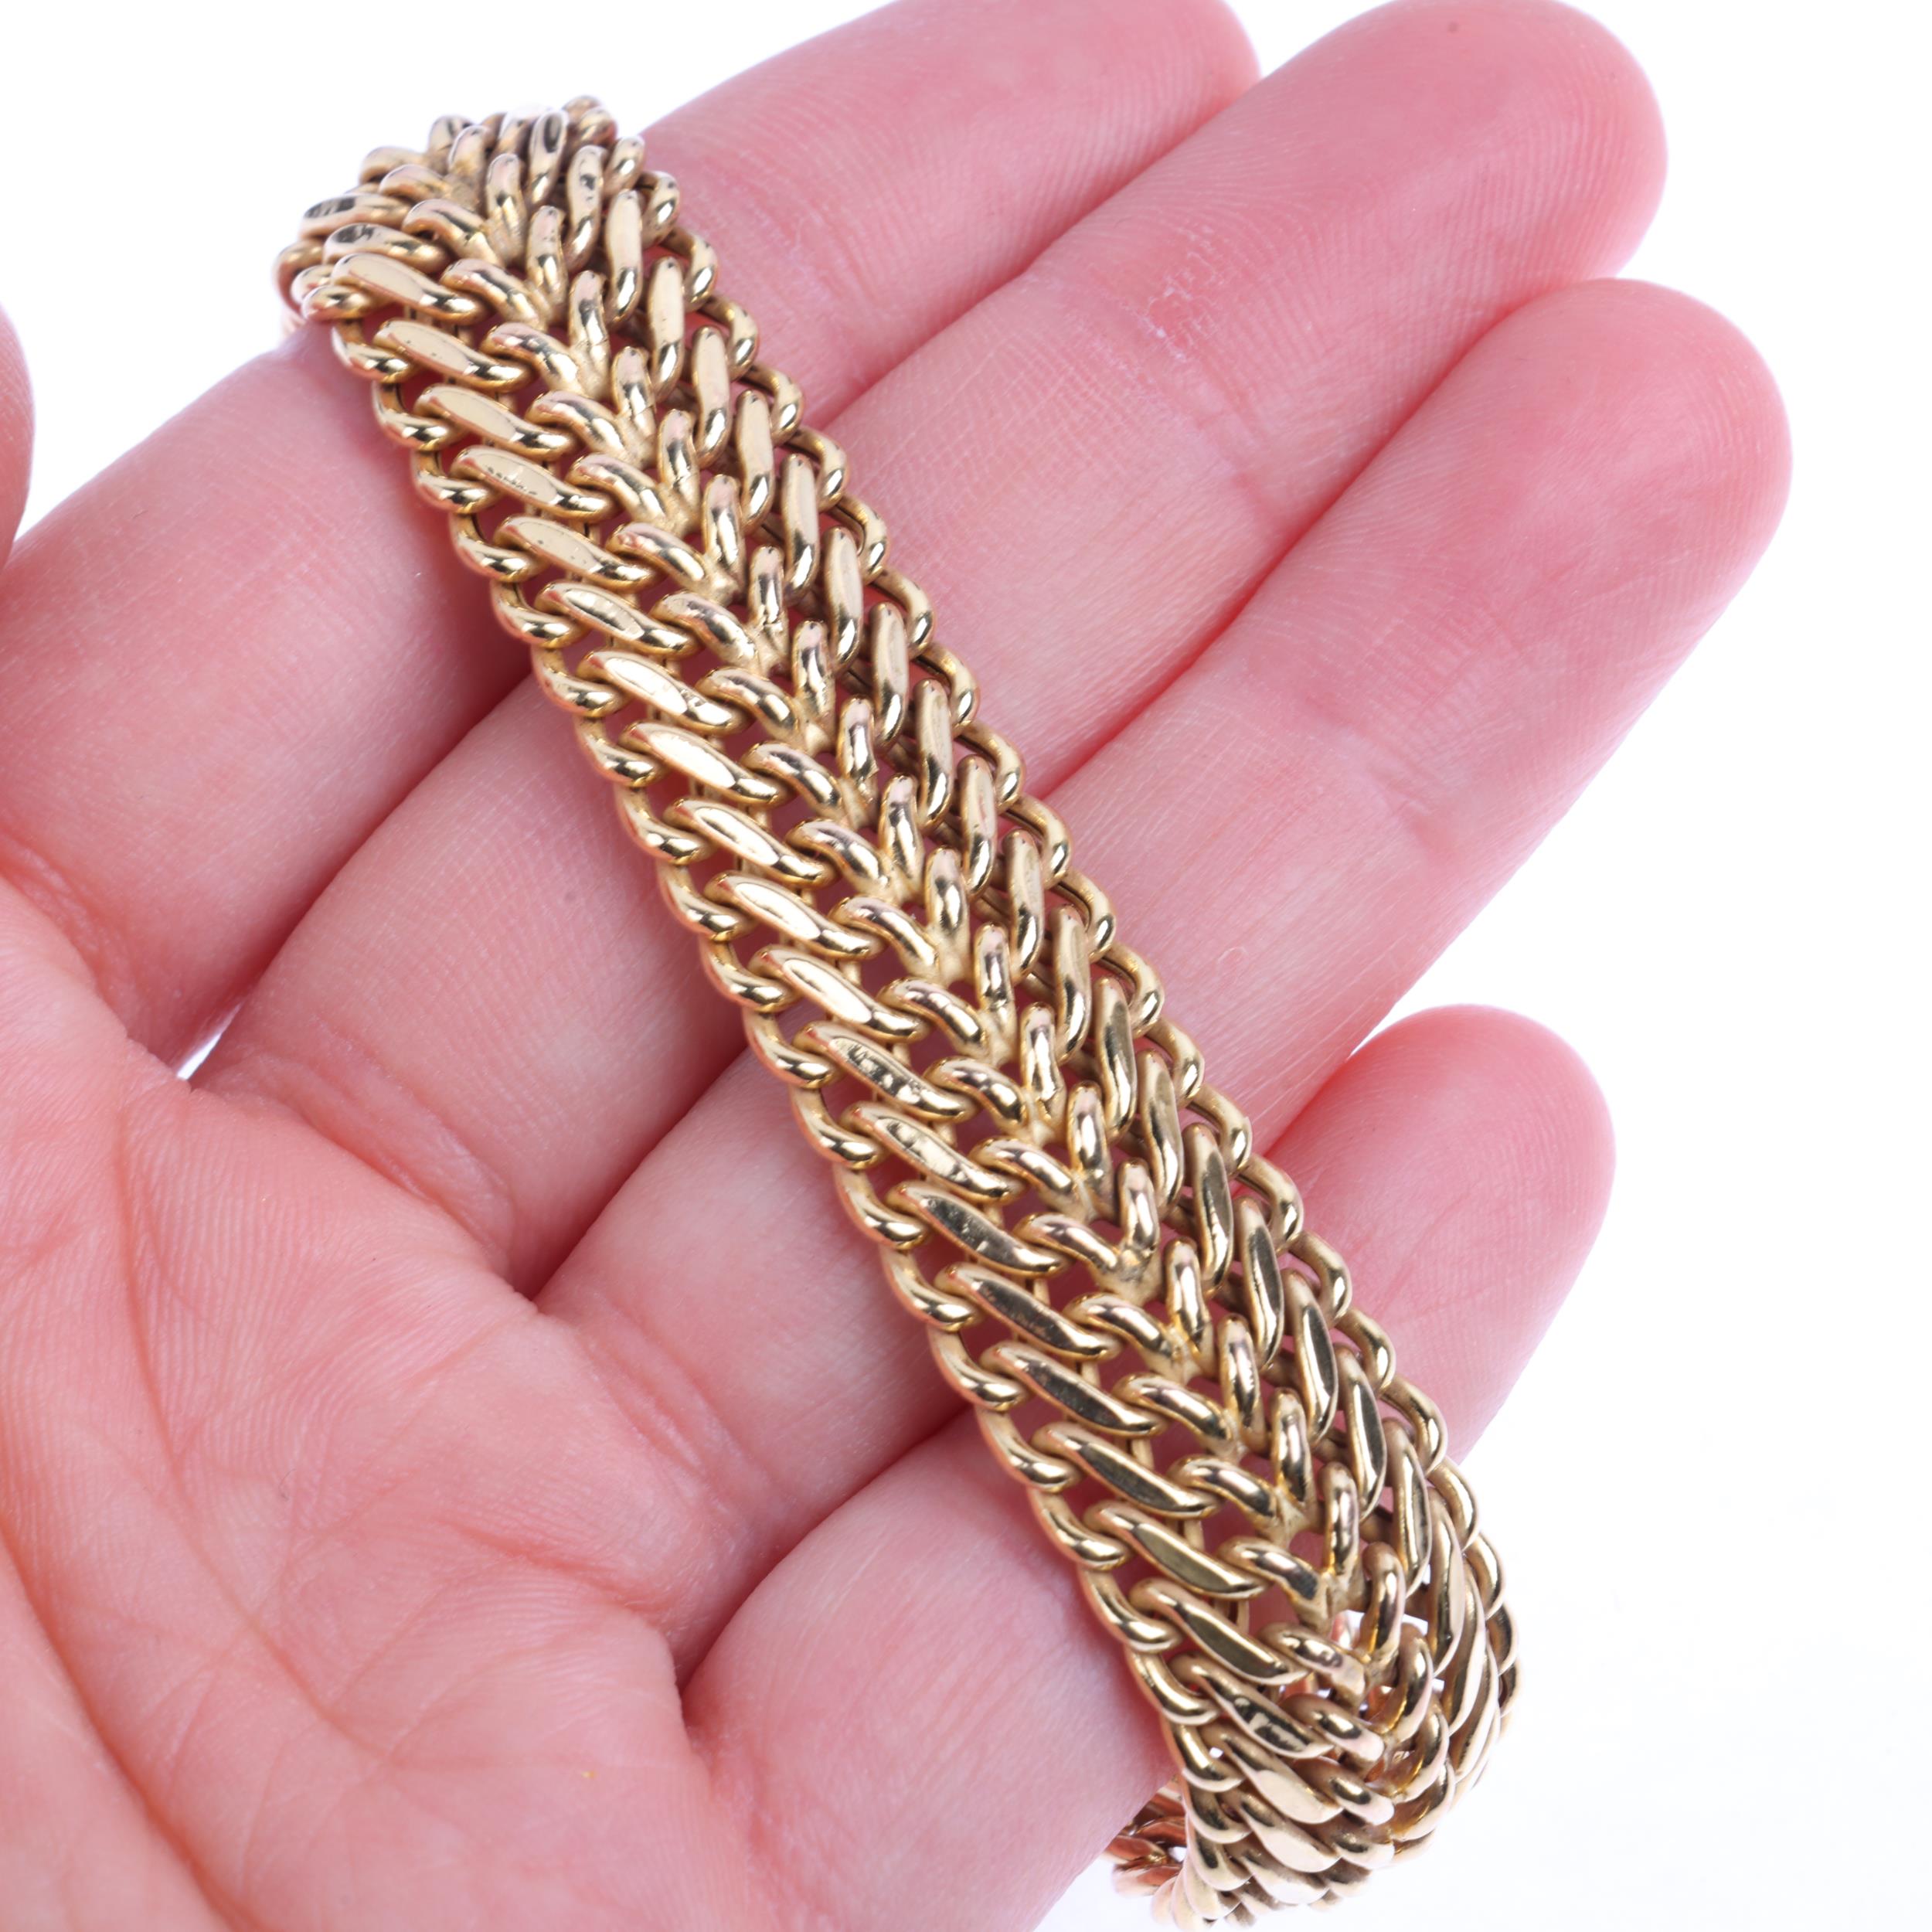 An Italian 9ct gold multiple hollow curb link chain bracelet, band width 14.9mm, 19cm, 16.9g - Image 4 of 4